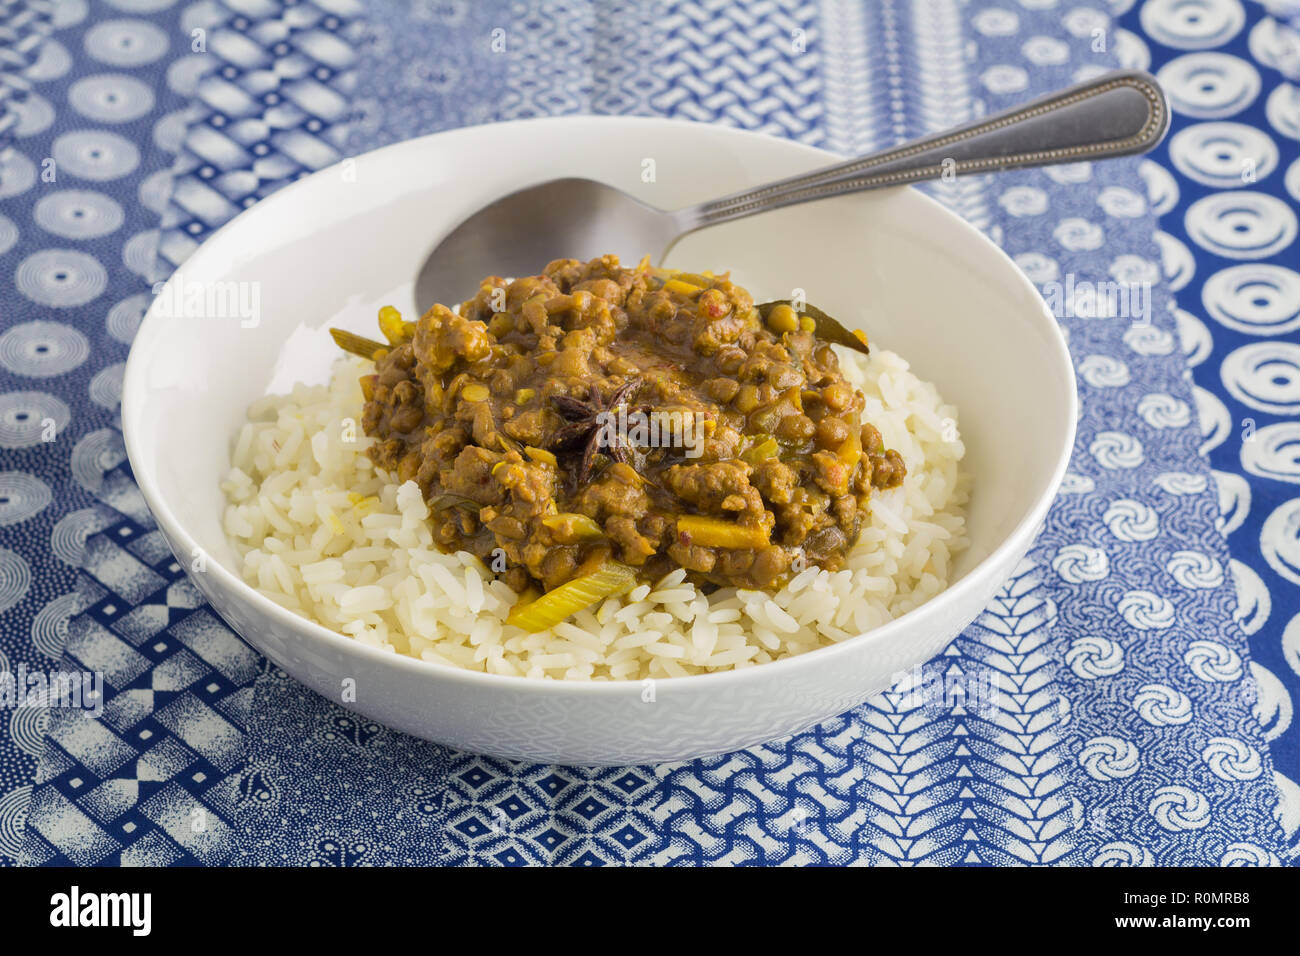 Lentil vegetable curry and rice close up on indigo ethnic printed blue and white tablecloth background Stock Photo